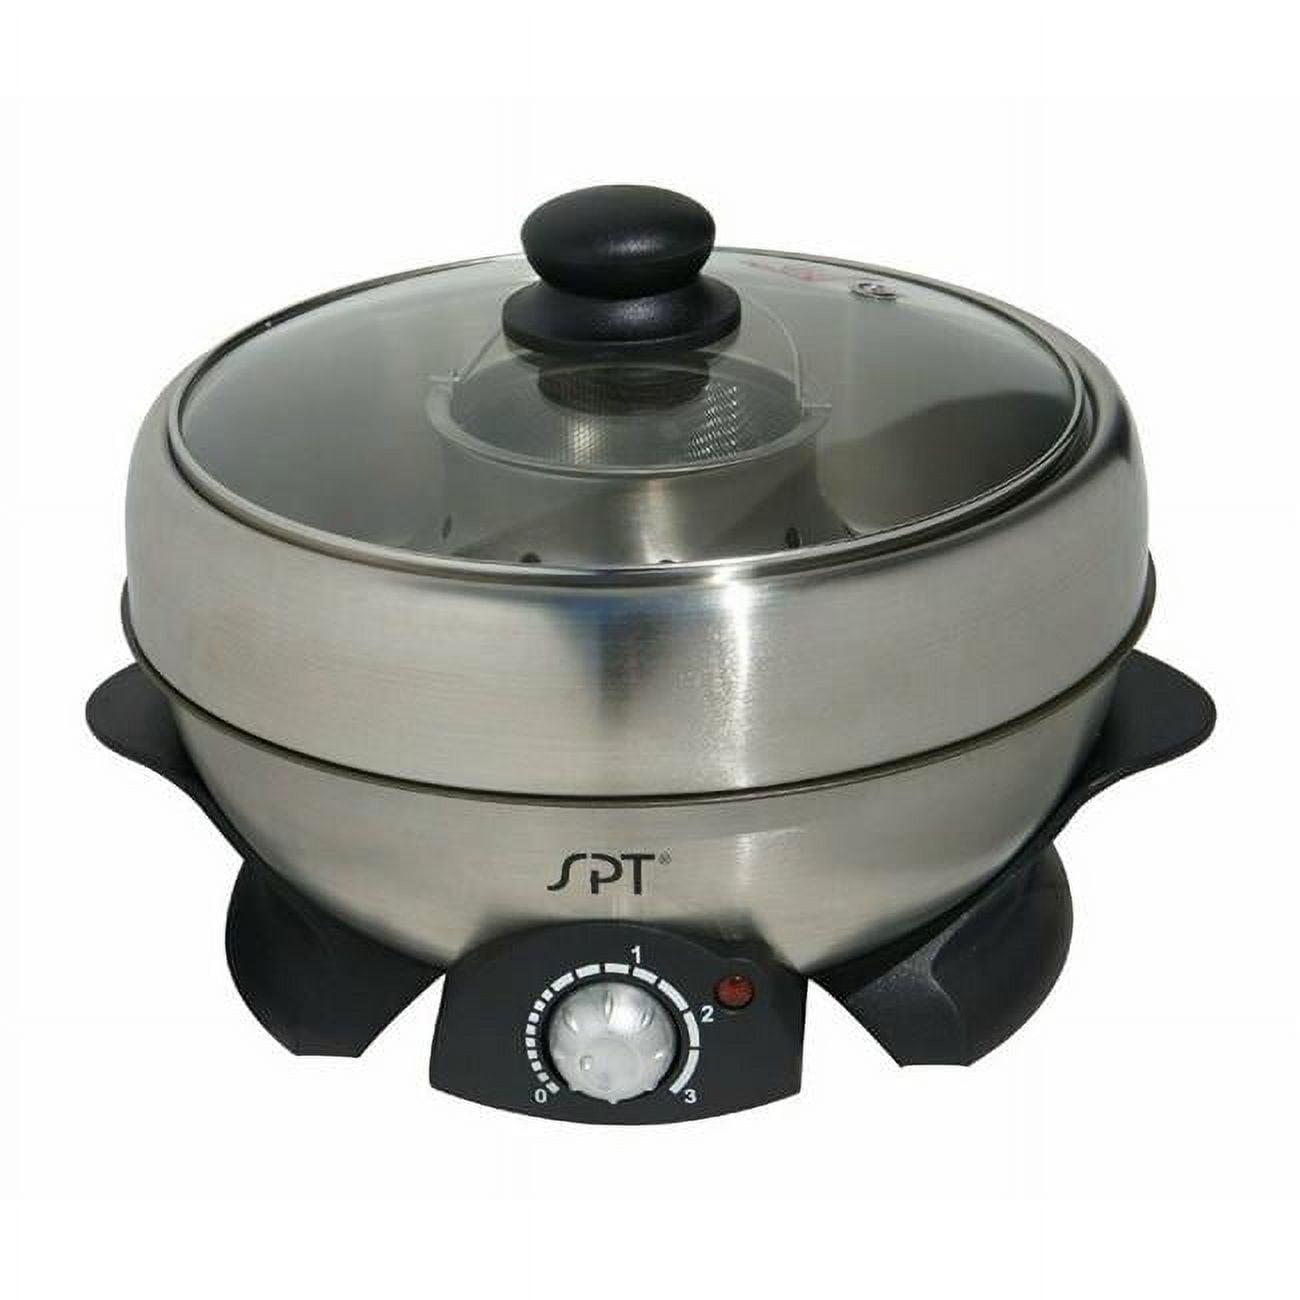 11" Stainless Steel Non-Stick Multi-Cooker with Grill